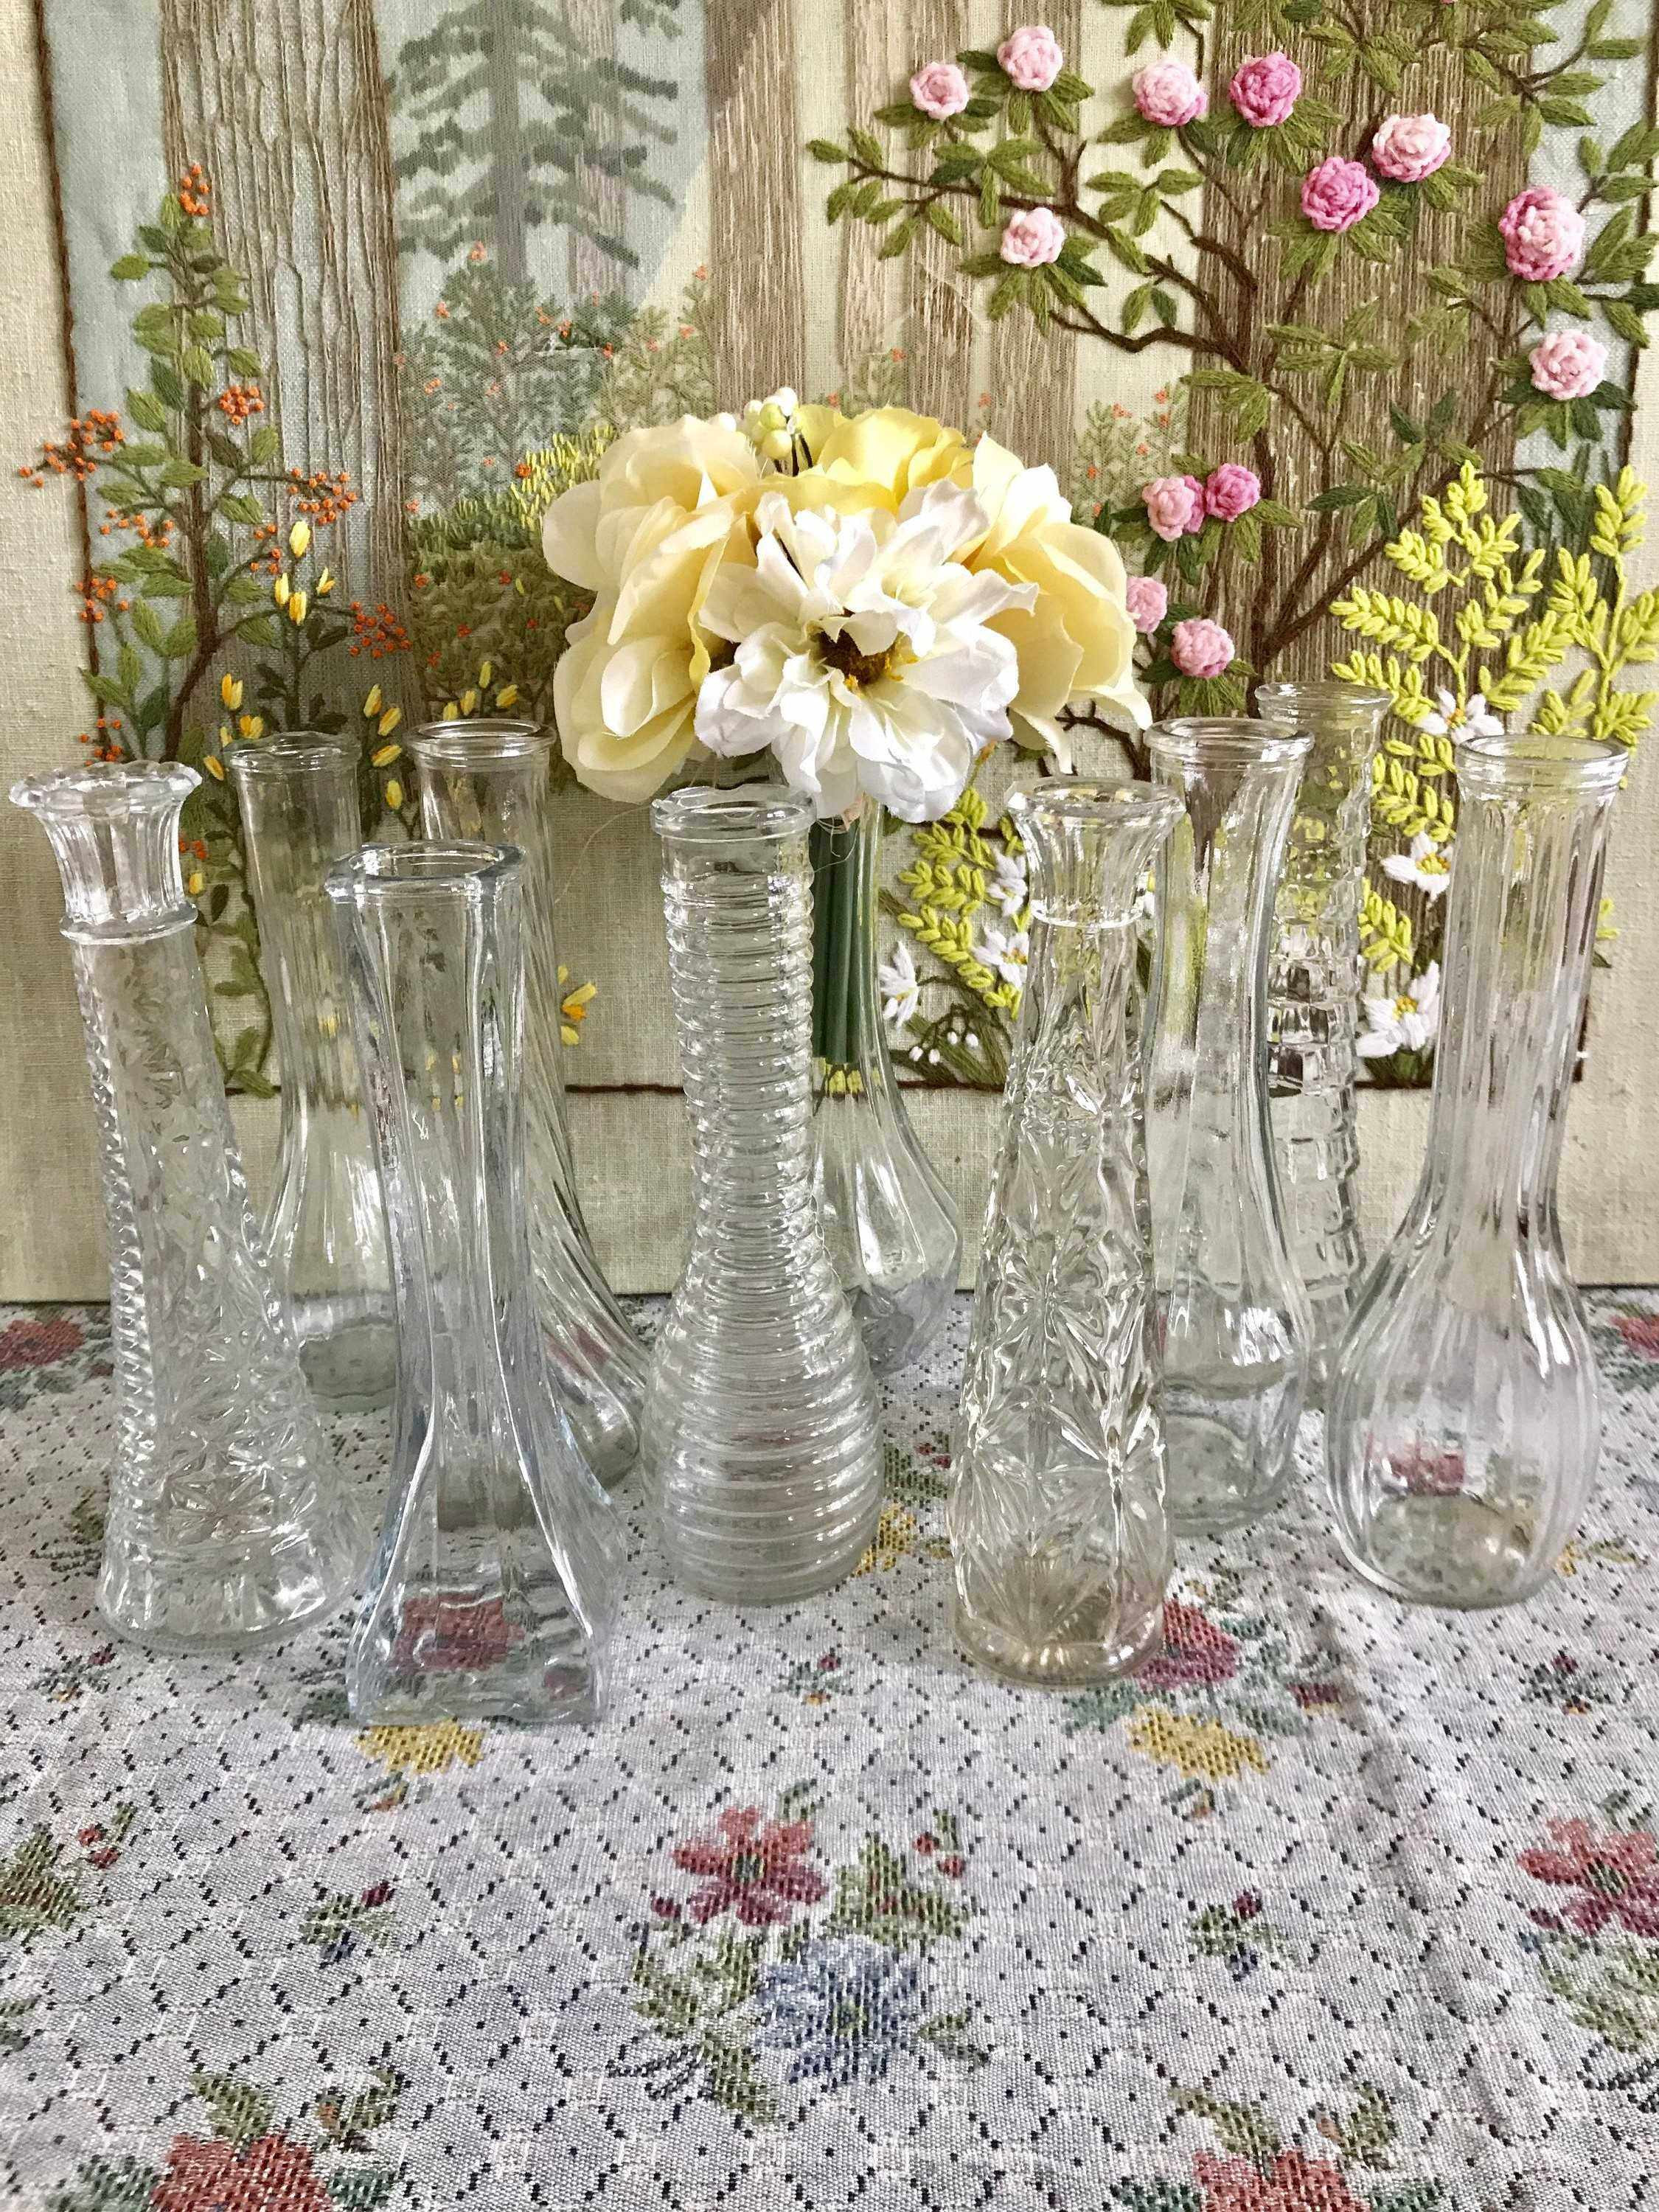 25 Perfect Tall Gold Centerpiece Vases 2024 free download tall gold centerpiece vases of wedding table centerpiece ideas beautiful living room gold vases for regarding wedding table centerpiece ideas beautiful living room gold vases for centerpiece